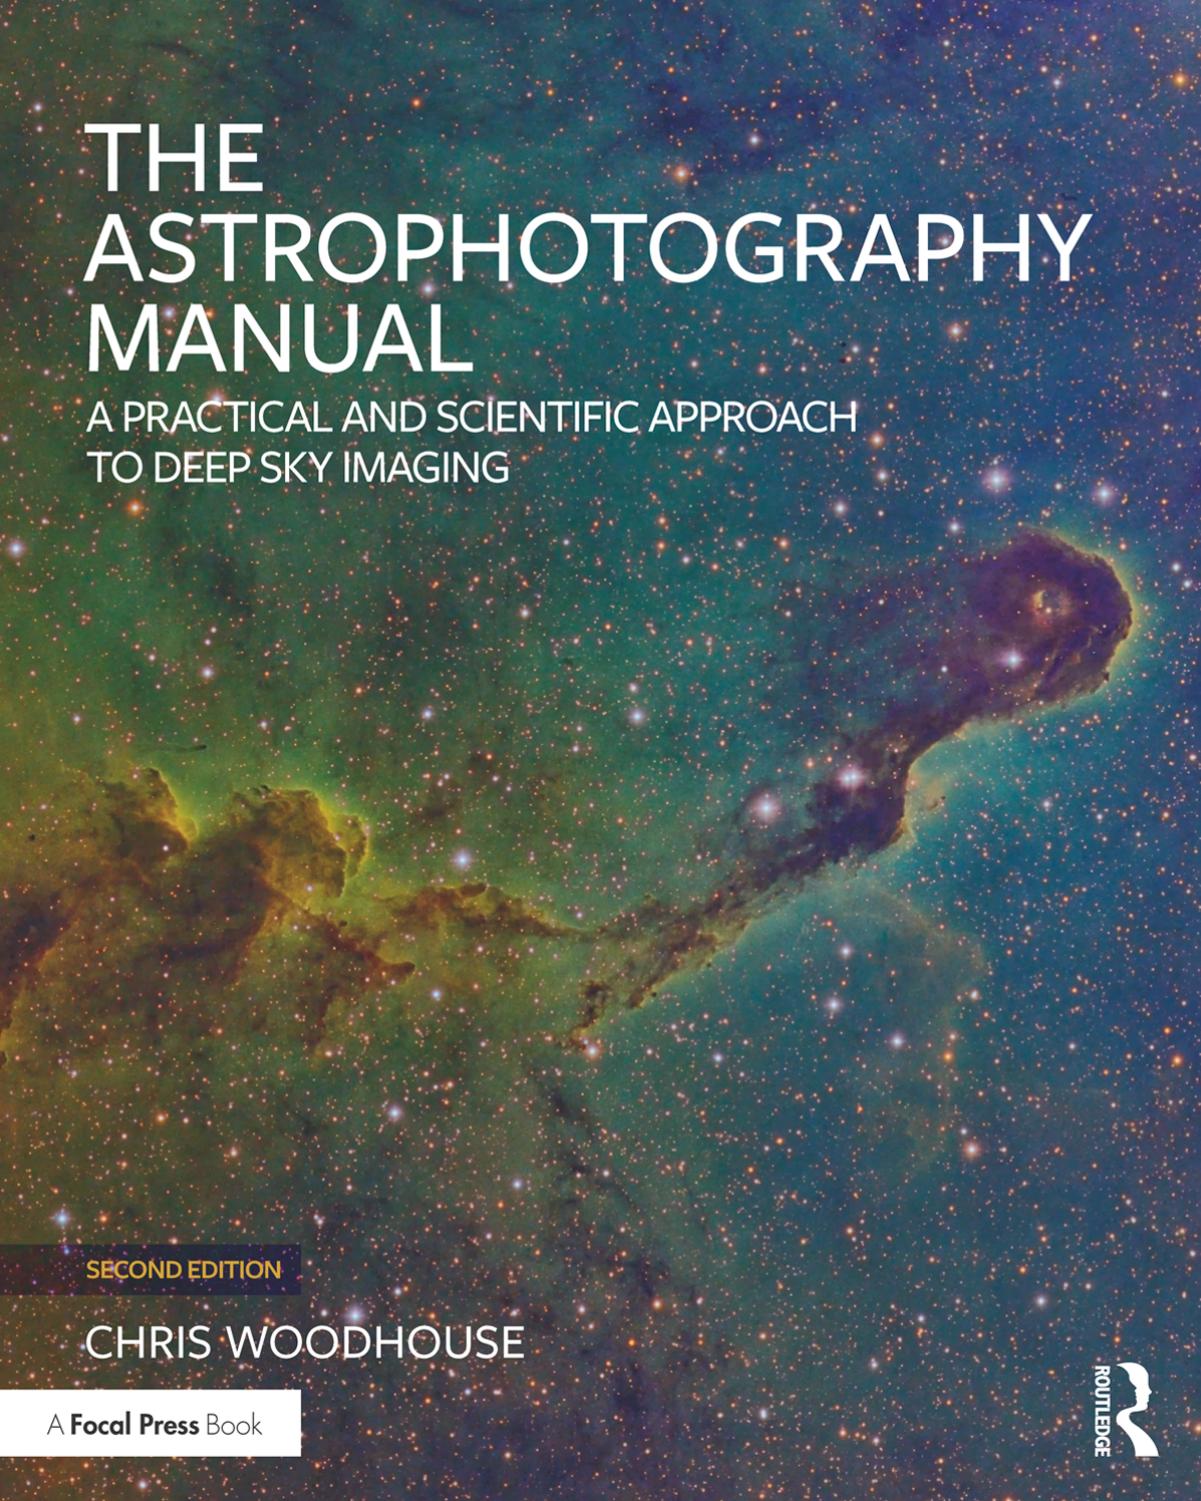 The Astrophotography Manual: A Practical and Scientific Approach to Deep Sky Imaging by Chris Woodhouse